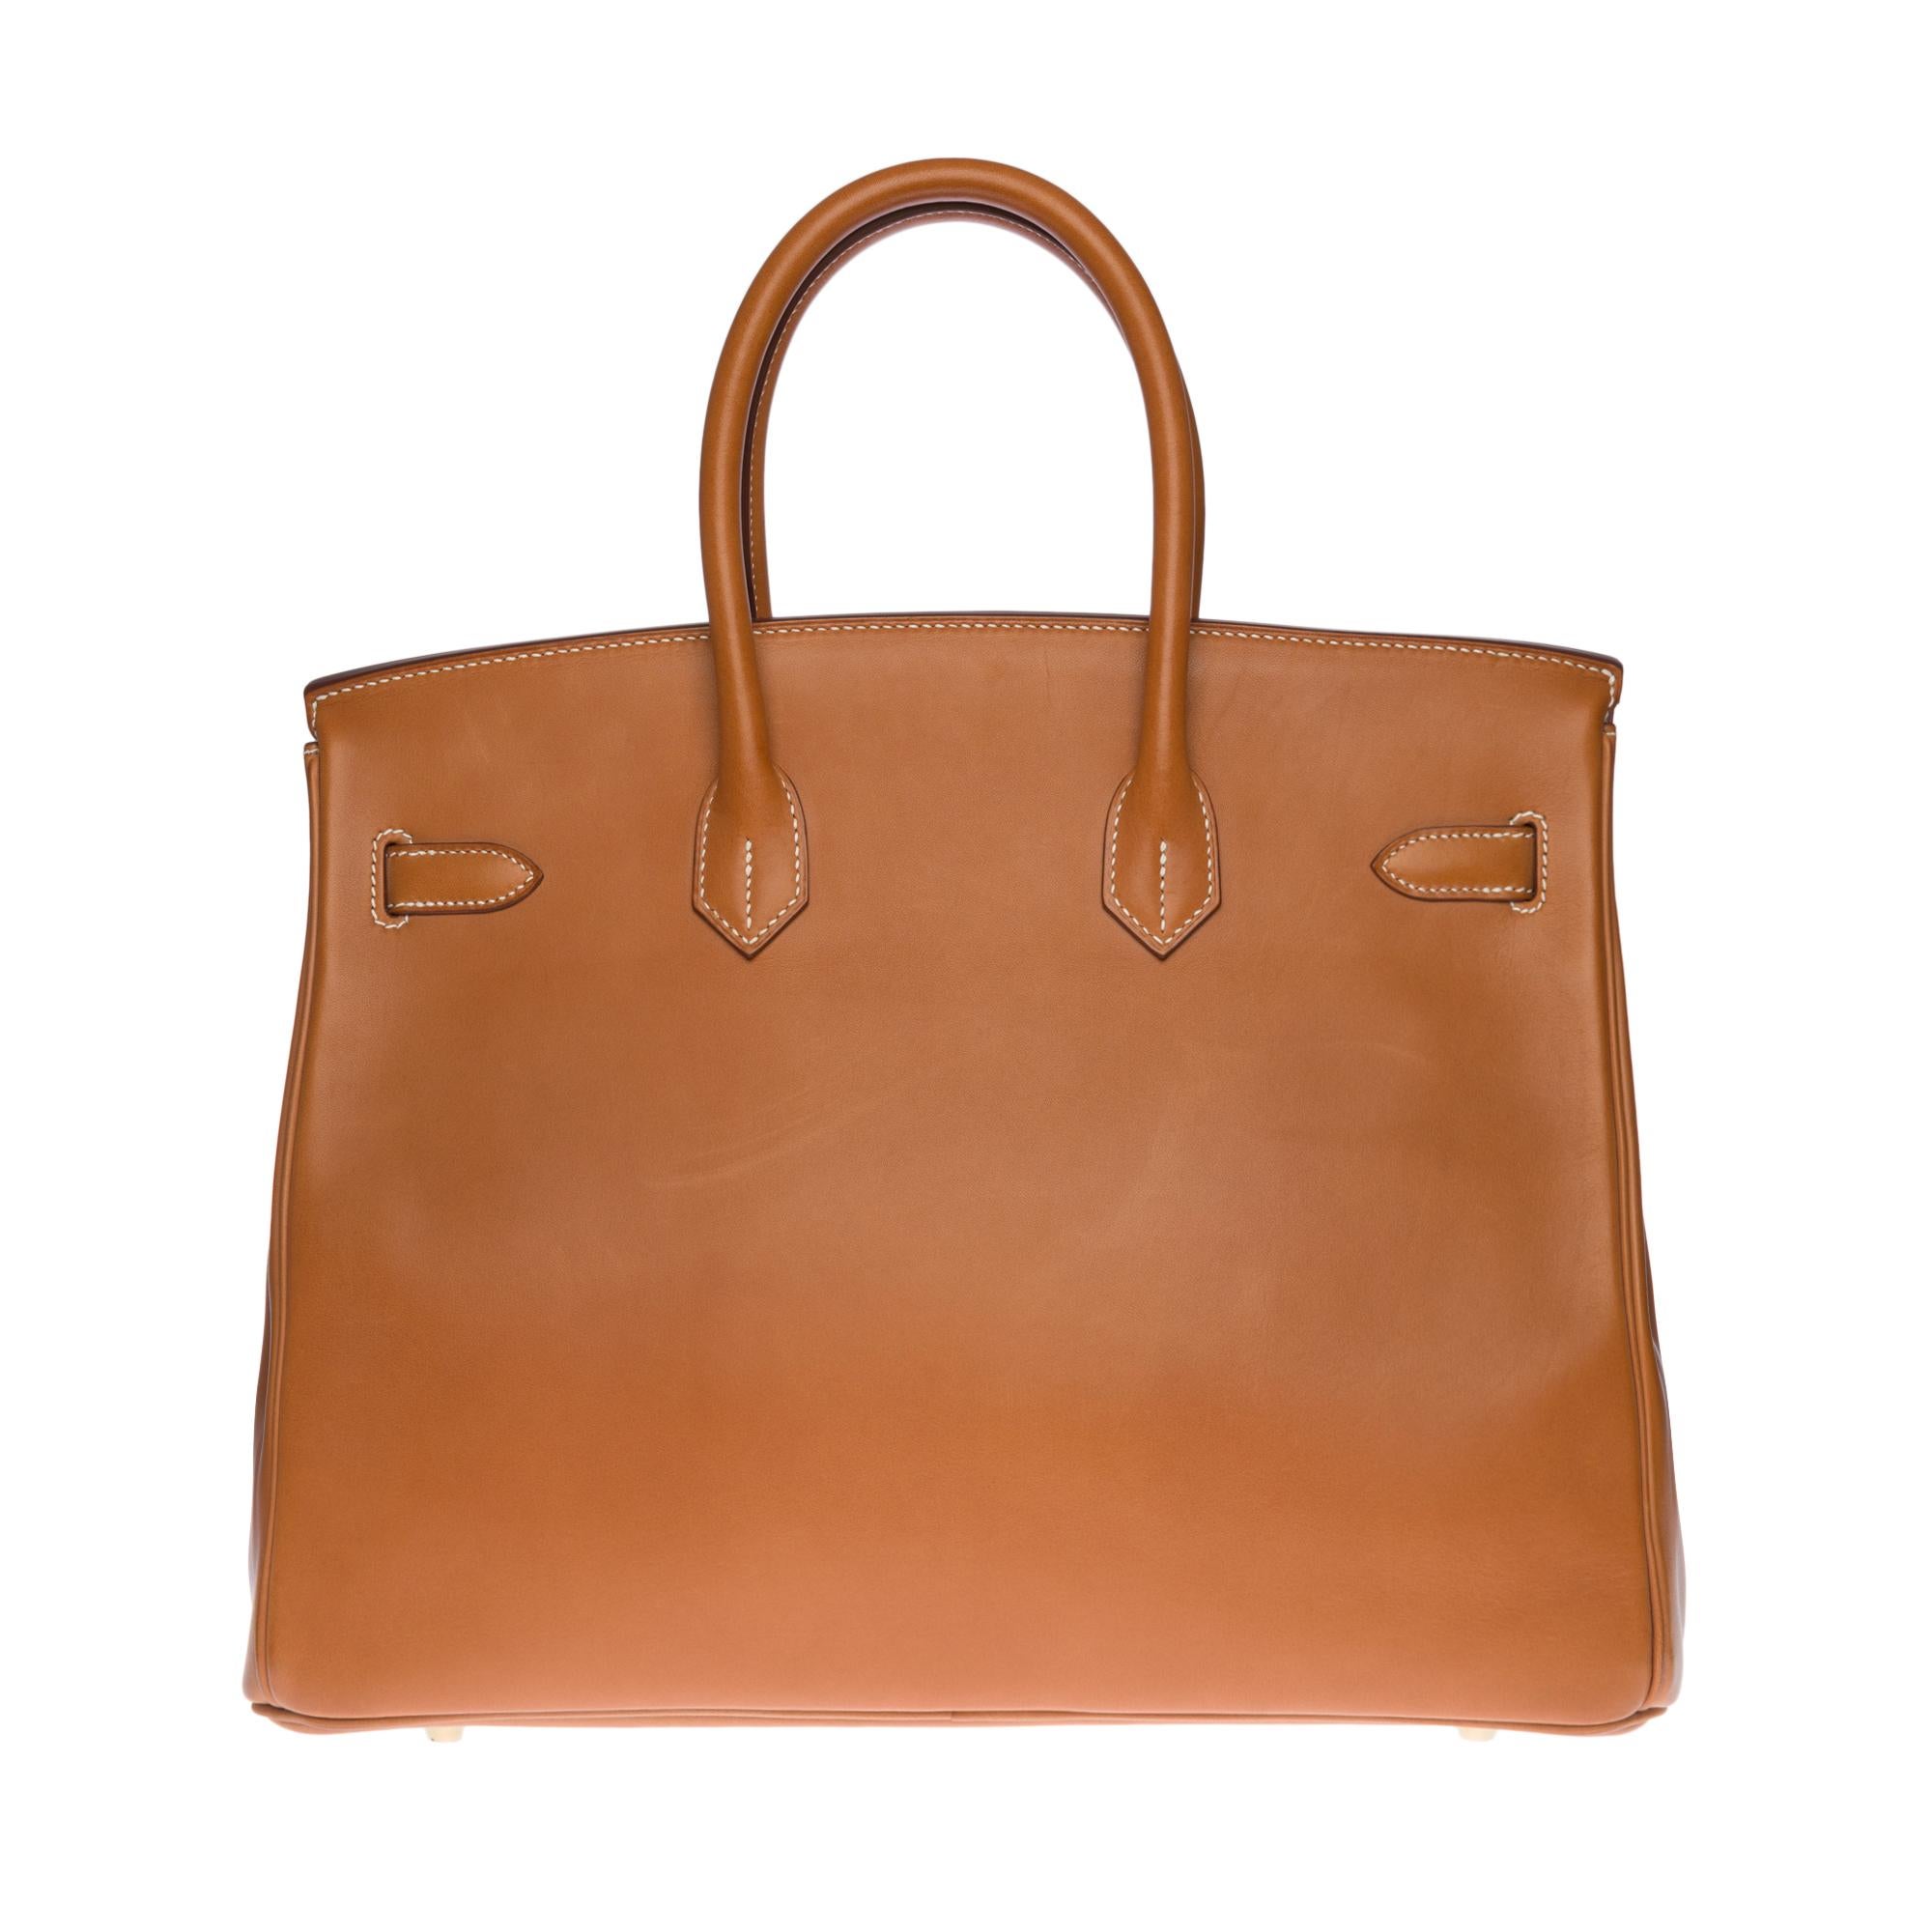 Rare & Exceptional Hermes Birkin 35 cm handbag in Barenia Gold leather, gold-plated metal hardware, double gold-plated leather handle allowing a handheld
Flap closure
Lining in gold leather, one zip pocket, one patch pocket
Signature: 